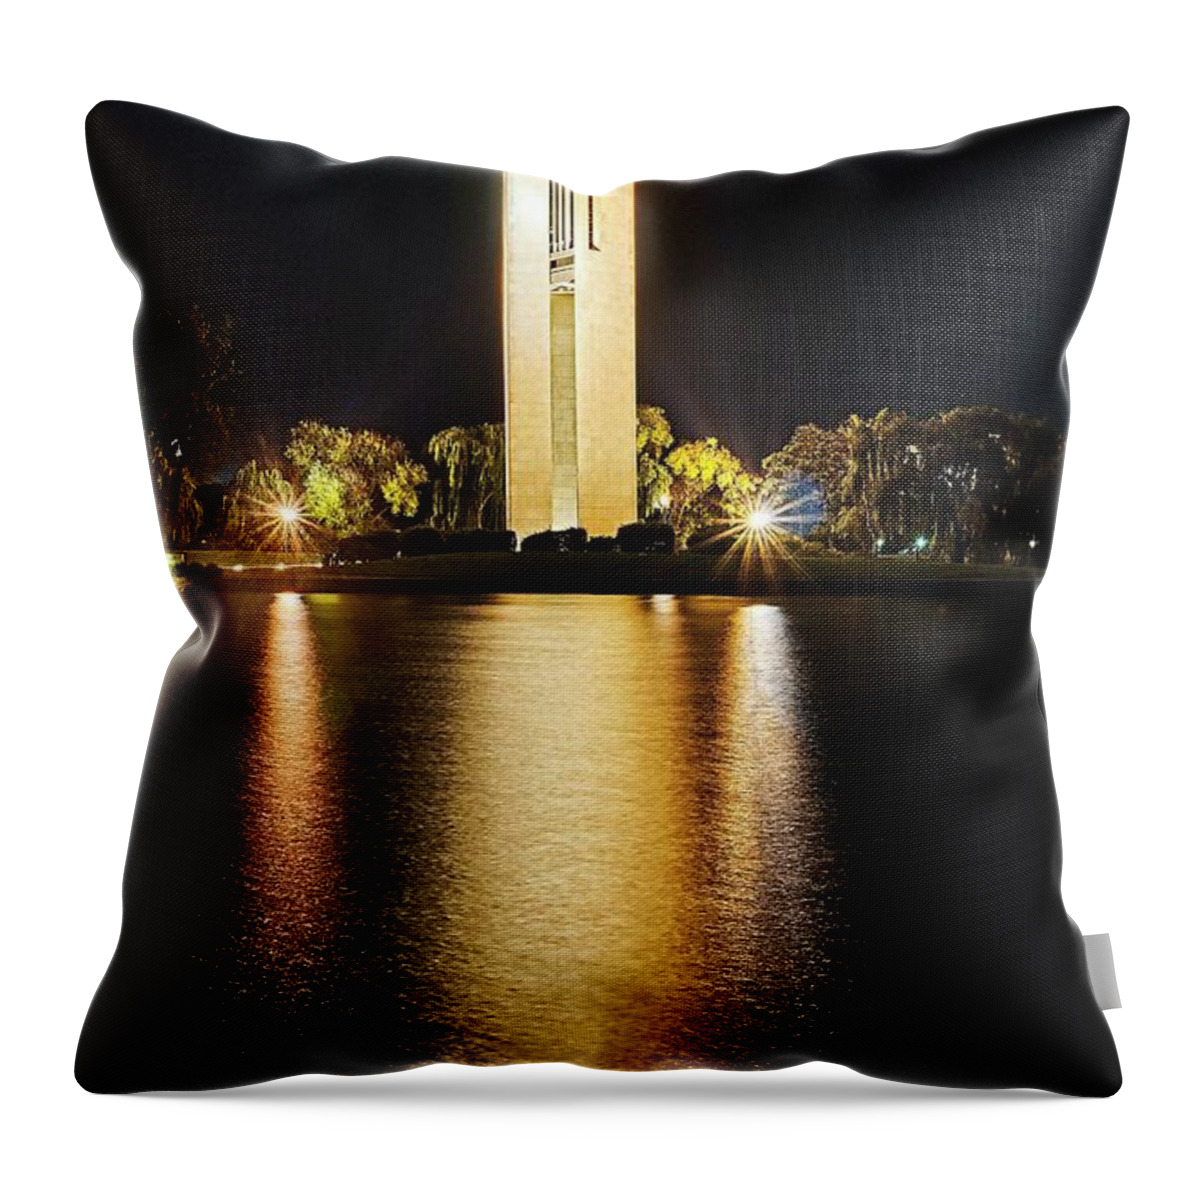 Canberra Throw Pillow featuring the photograph Carillon - Canberra - Australia #2 by Steven Ralser